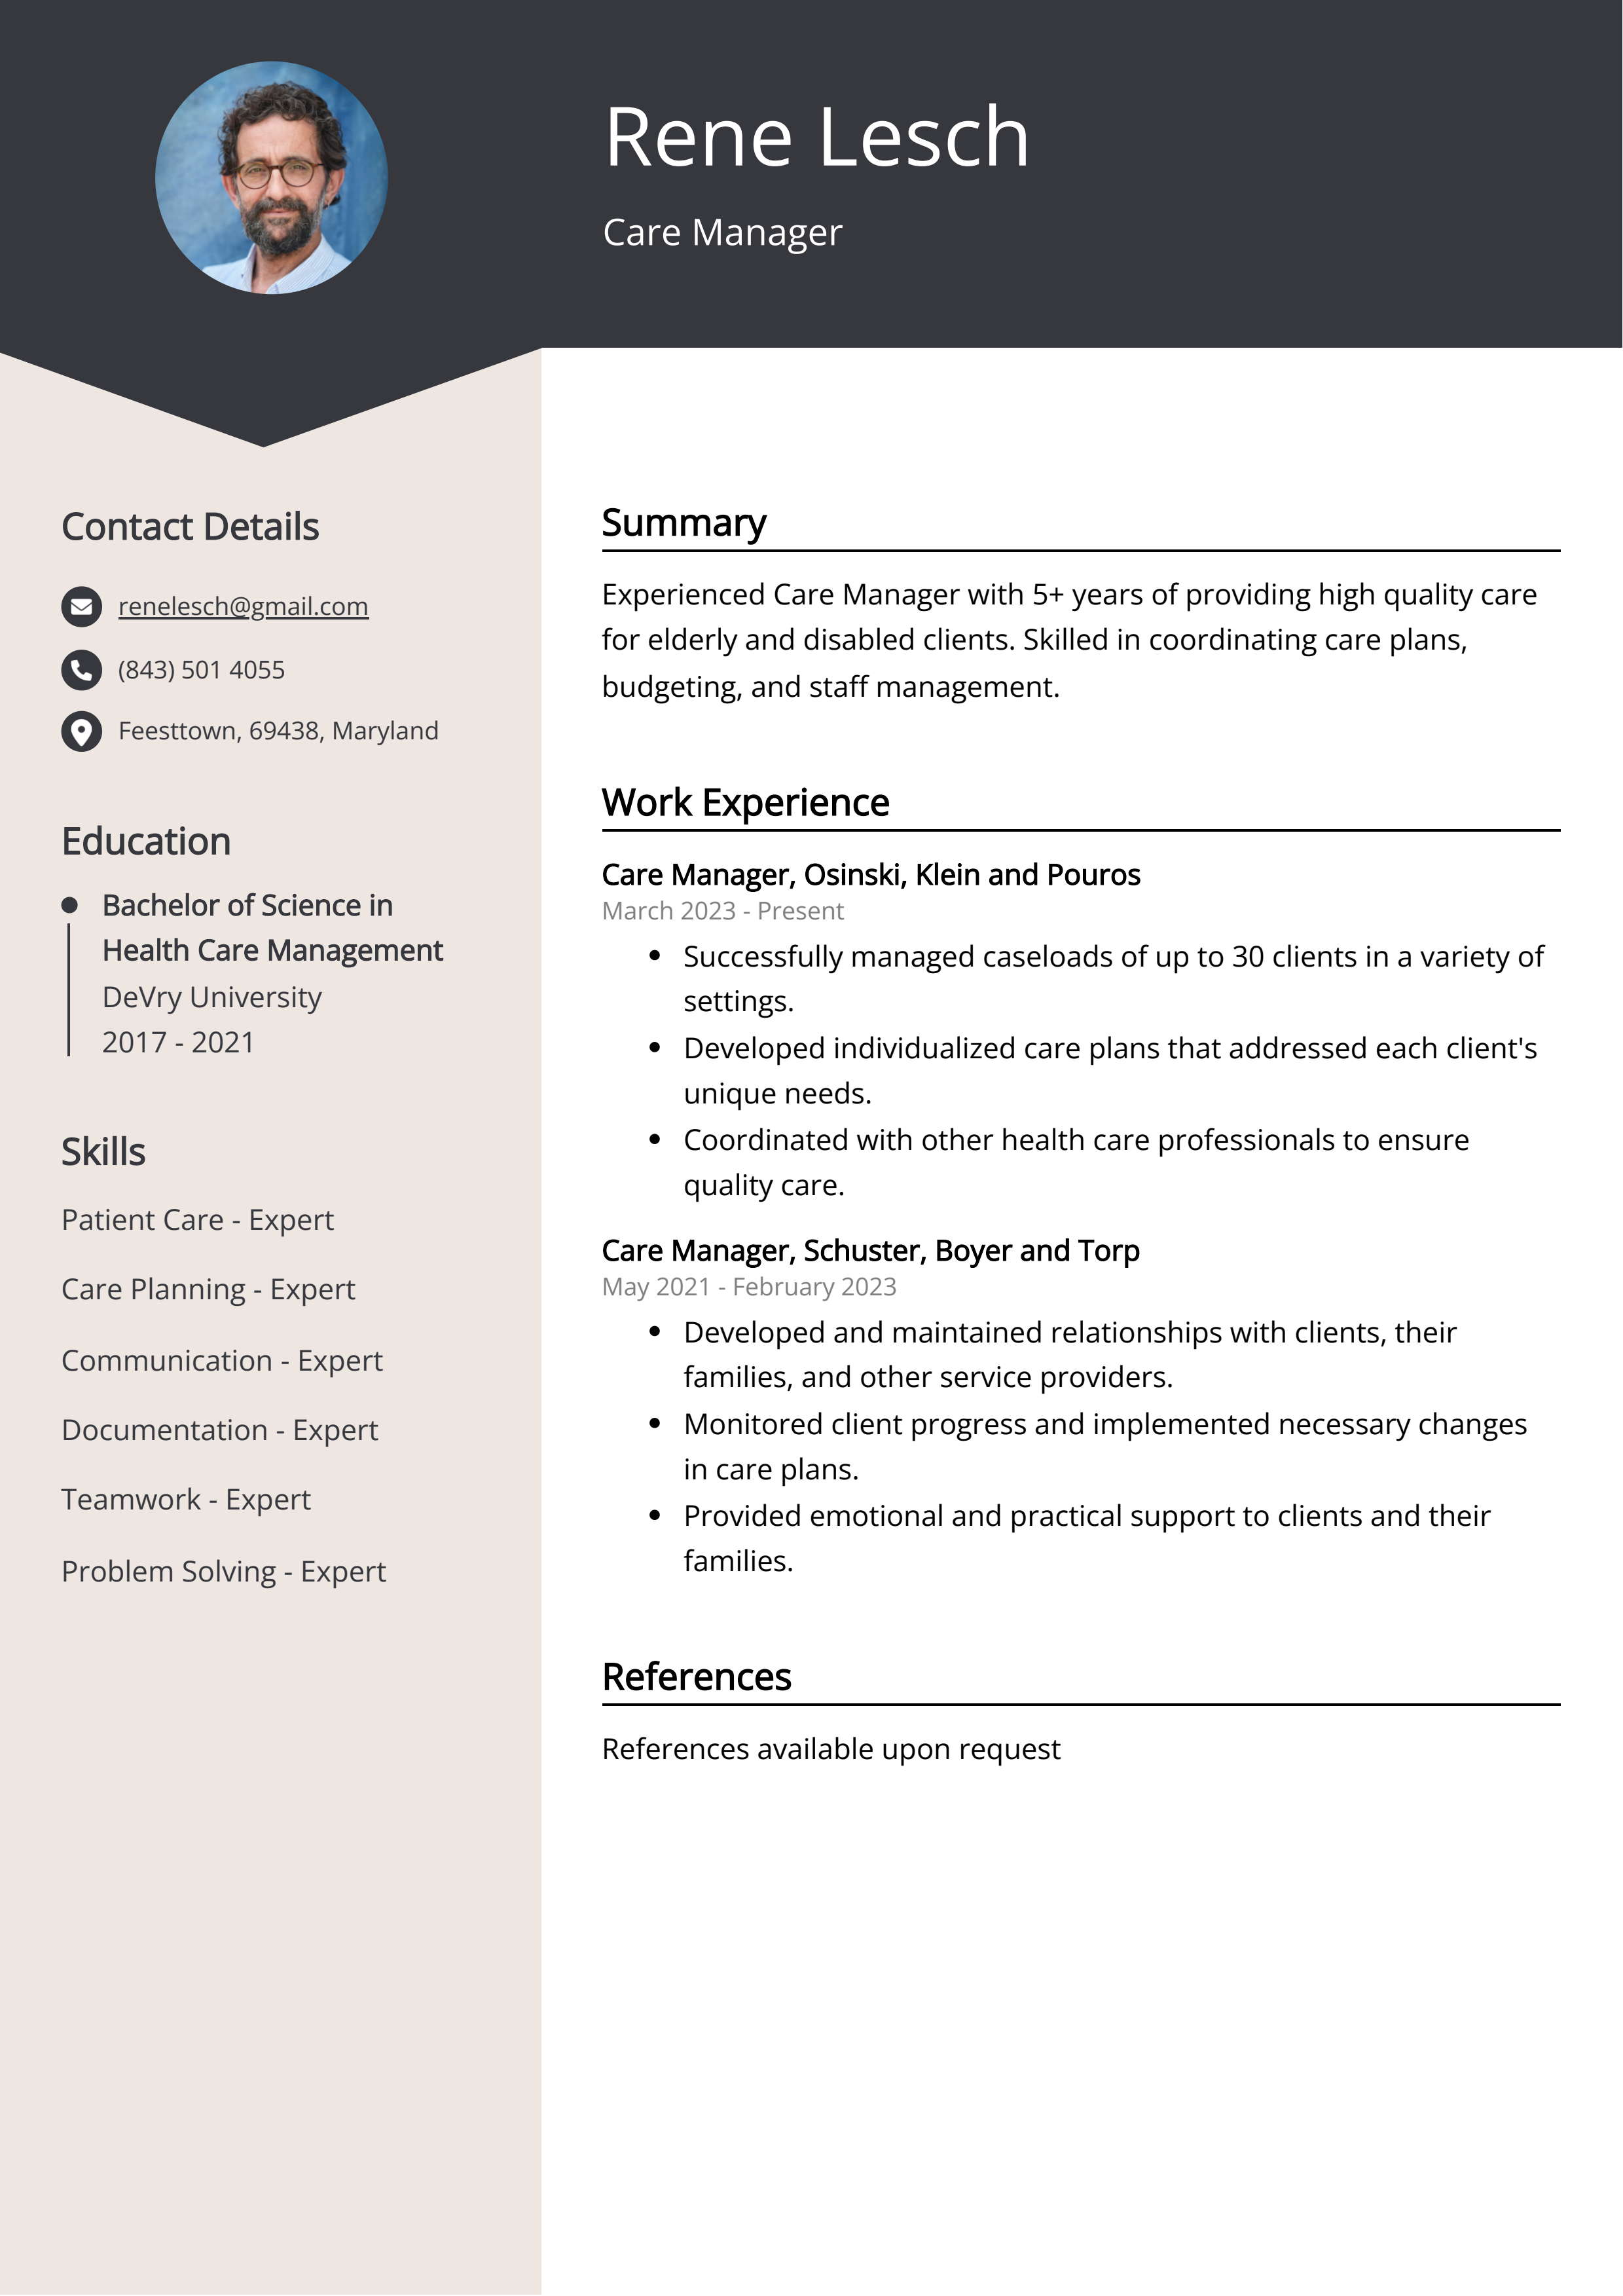 Care Manager CV Example